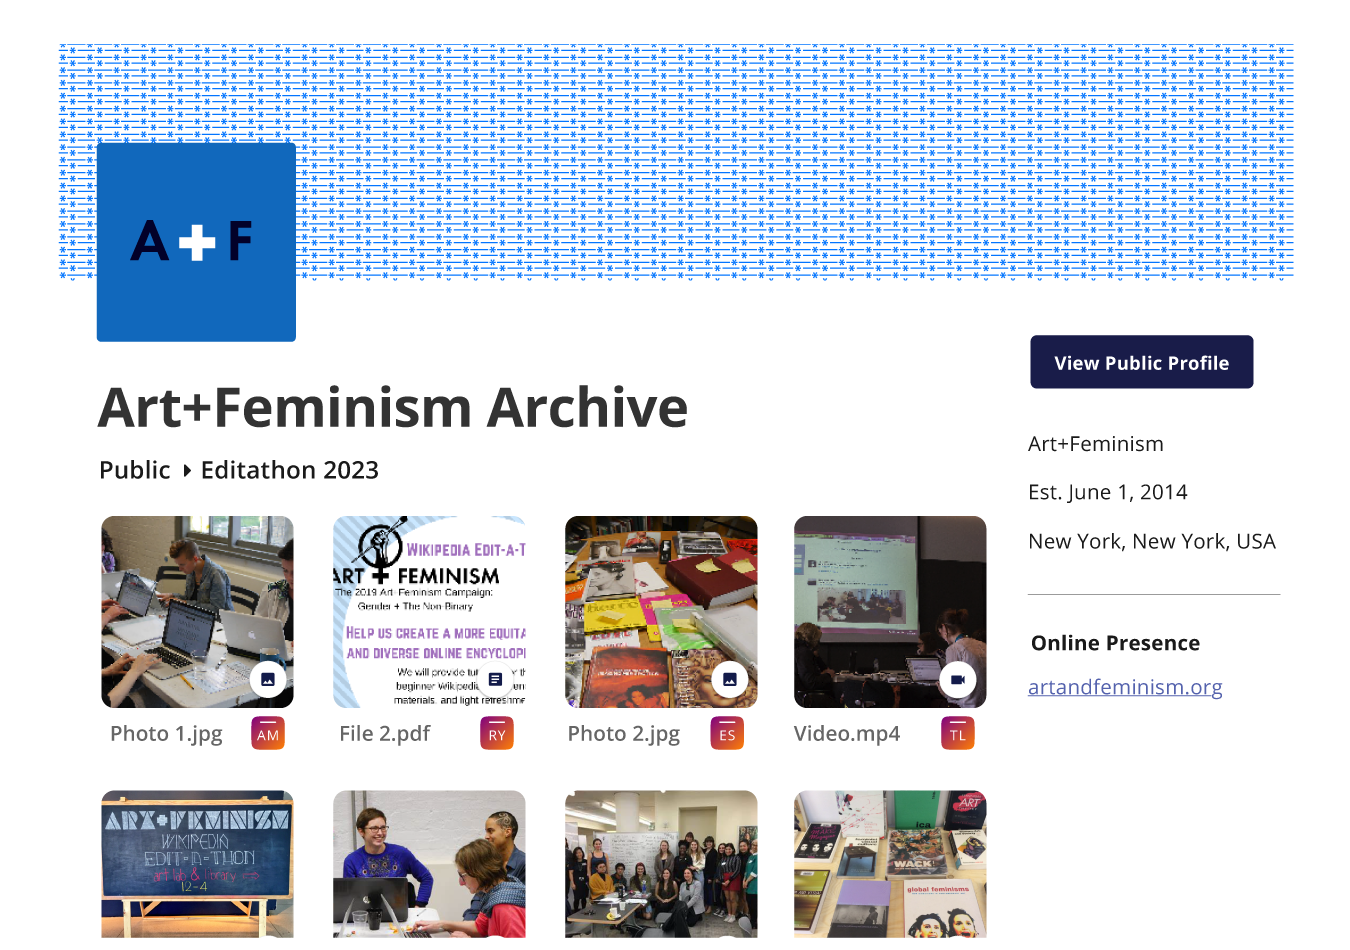 In Art+Feminism's public archive on Permanent, a folder titled Editathon 2023, containing photos and video from a Wikipedia editathon